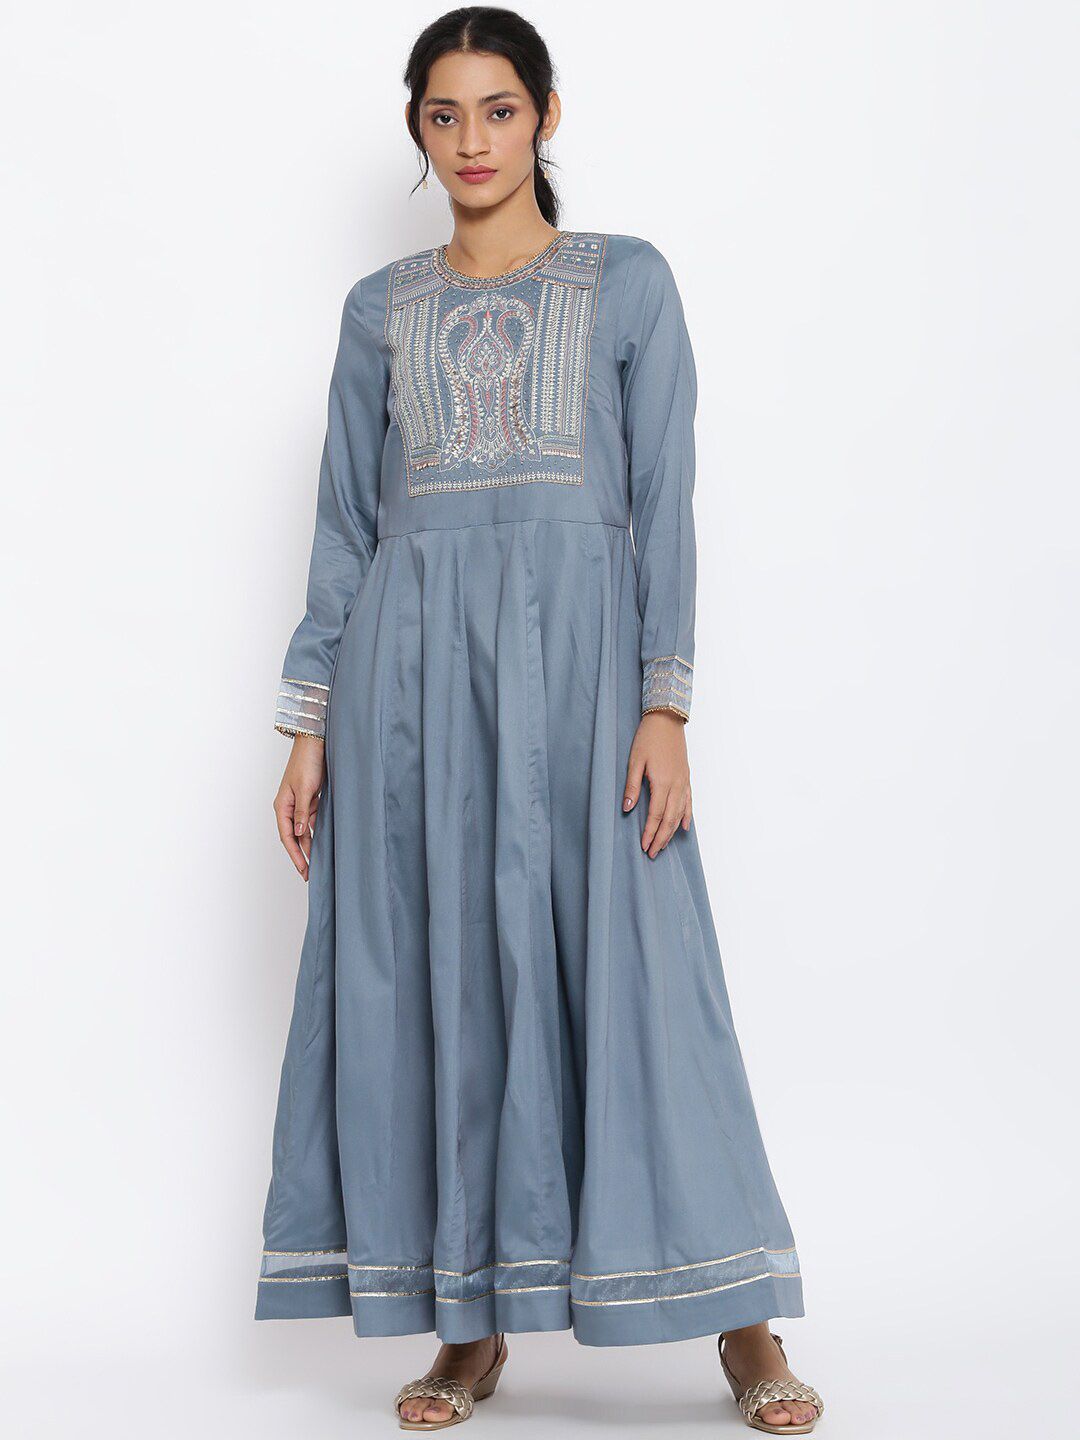 WISHFUL Women Blue Ethnic Motifs Embroidered Ethnic Maxi Dress Price in India